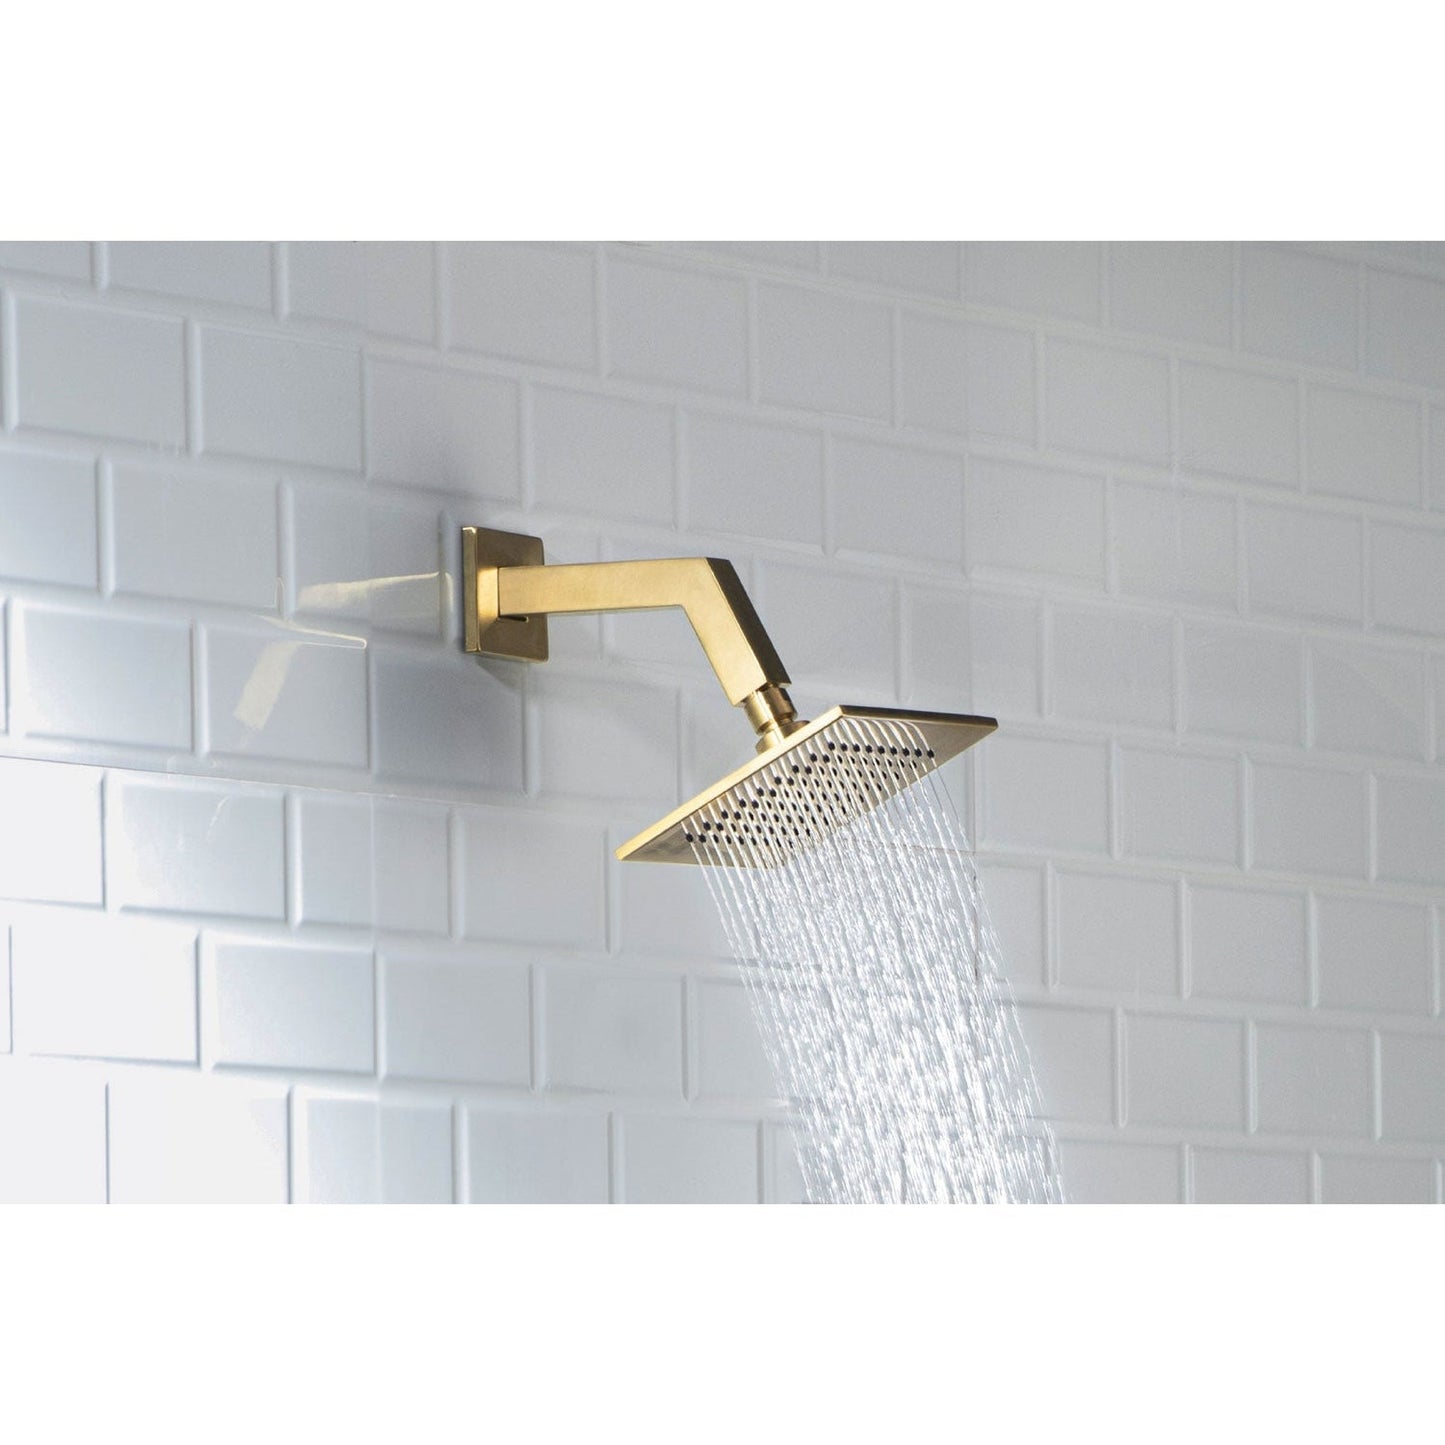 Isenberg Serie 196 Single Output Brushed Nickel PVD Wall-Mounted Shower Set With 6" Solid Brass Rainhead Shower Head, Single Handle Shower Trim and 1-Output Single Control Pressure Balance Valve